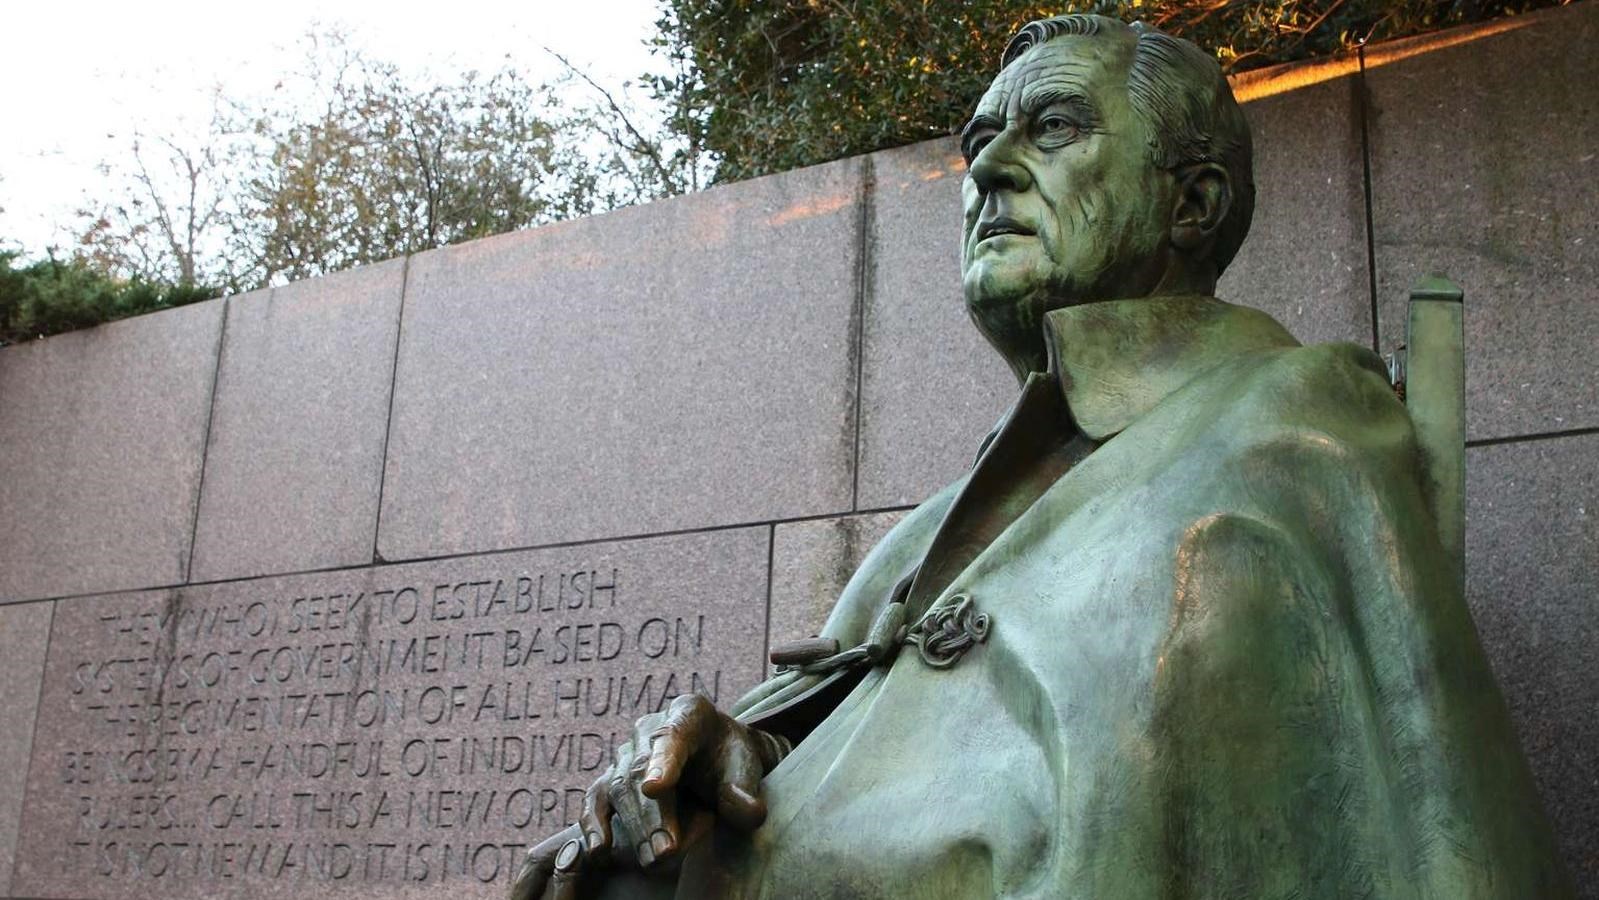 Statue of man (FDR) in front of stone wall with inscription.